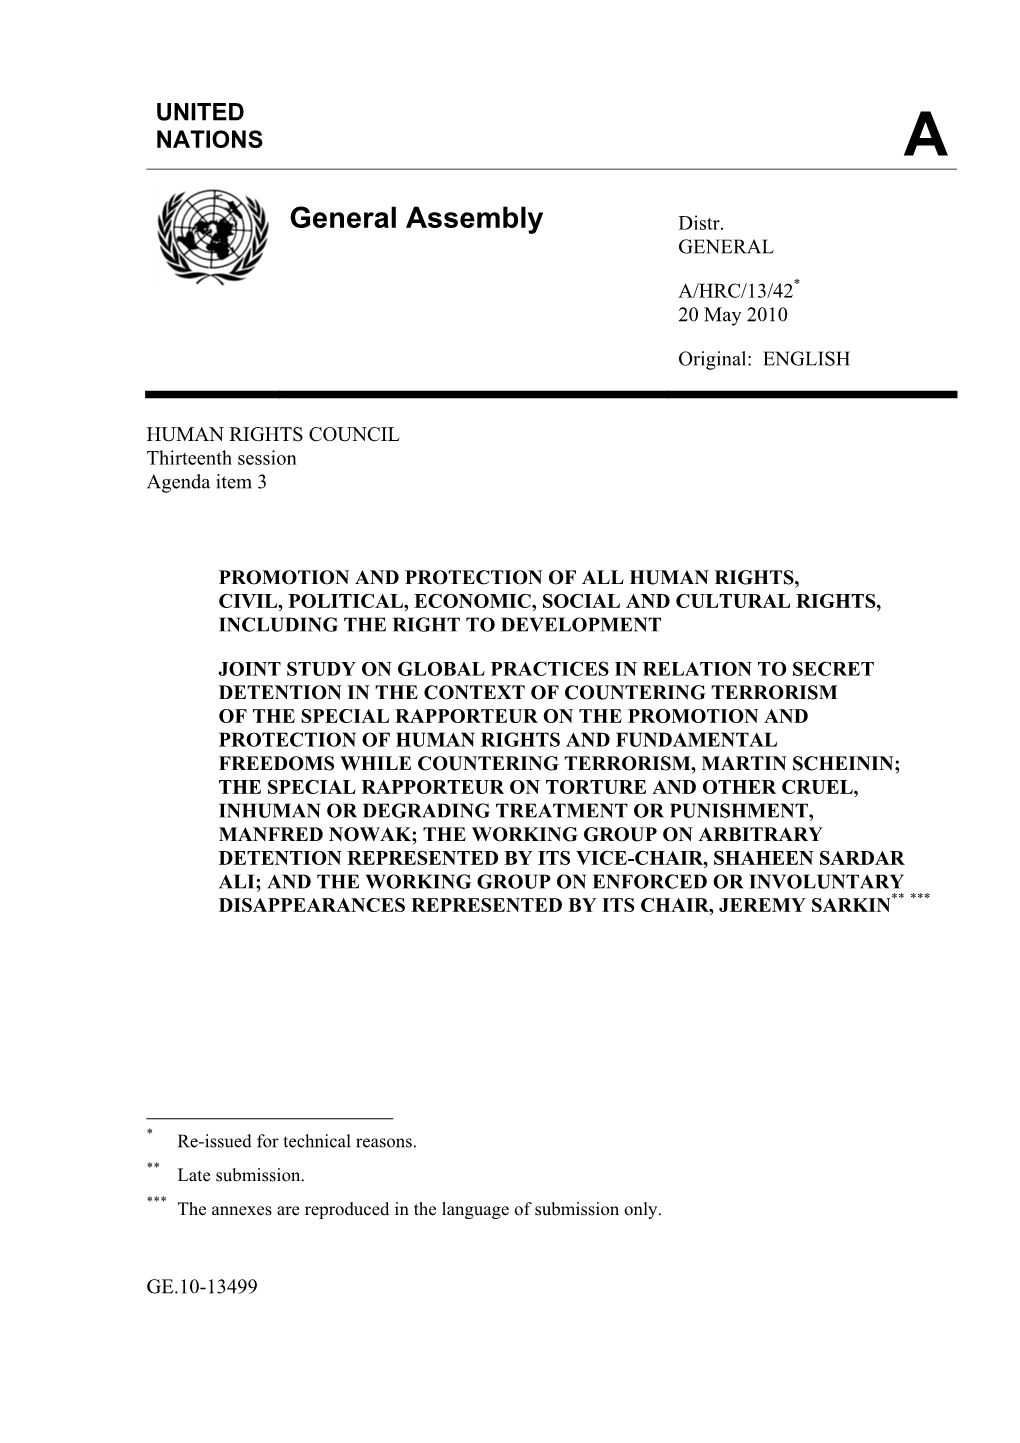 Joint Study on Secret Detention of the Special Rapporteur on Torture & Other Cruel, Inhuman Or